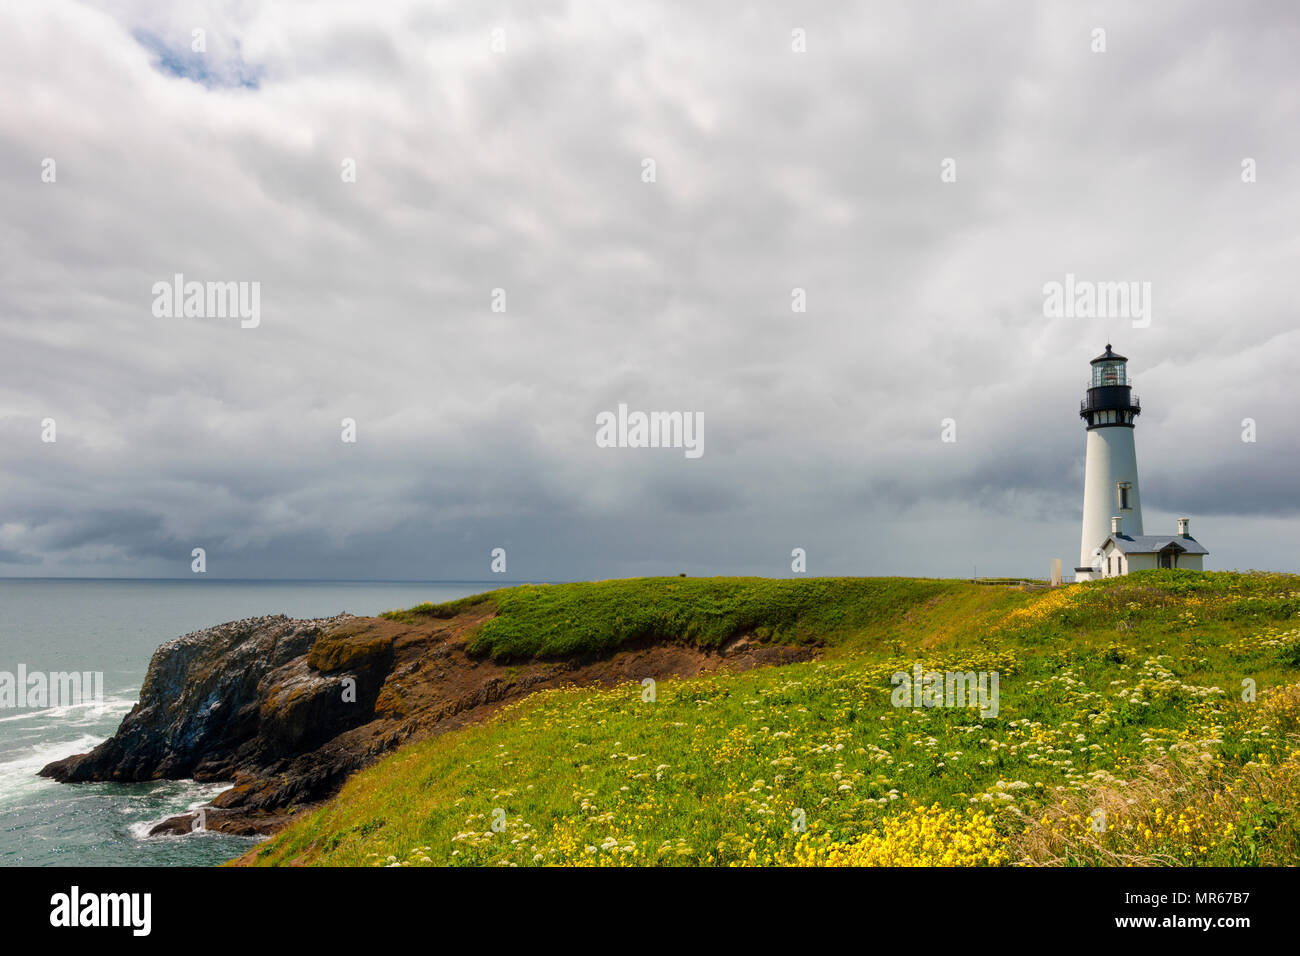 Yaquina Head Lighthouse on the Oregon coast in Newport Oregon.  Big cloudy skies for copyspace with yellow wildflowers blooming in the foreground Stock Photo